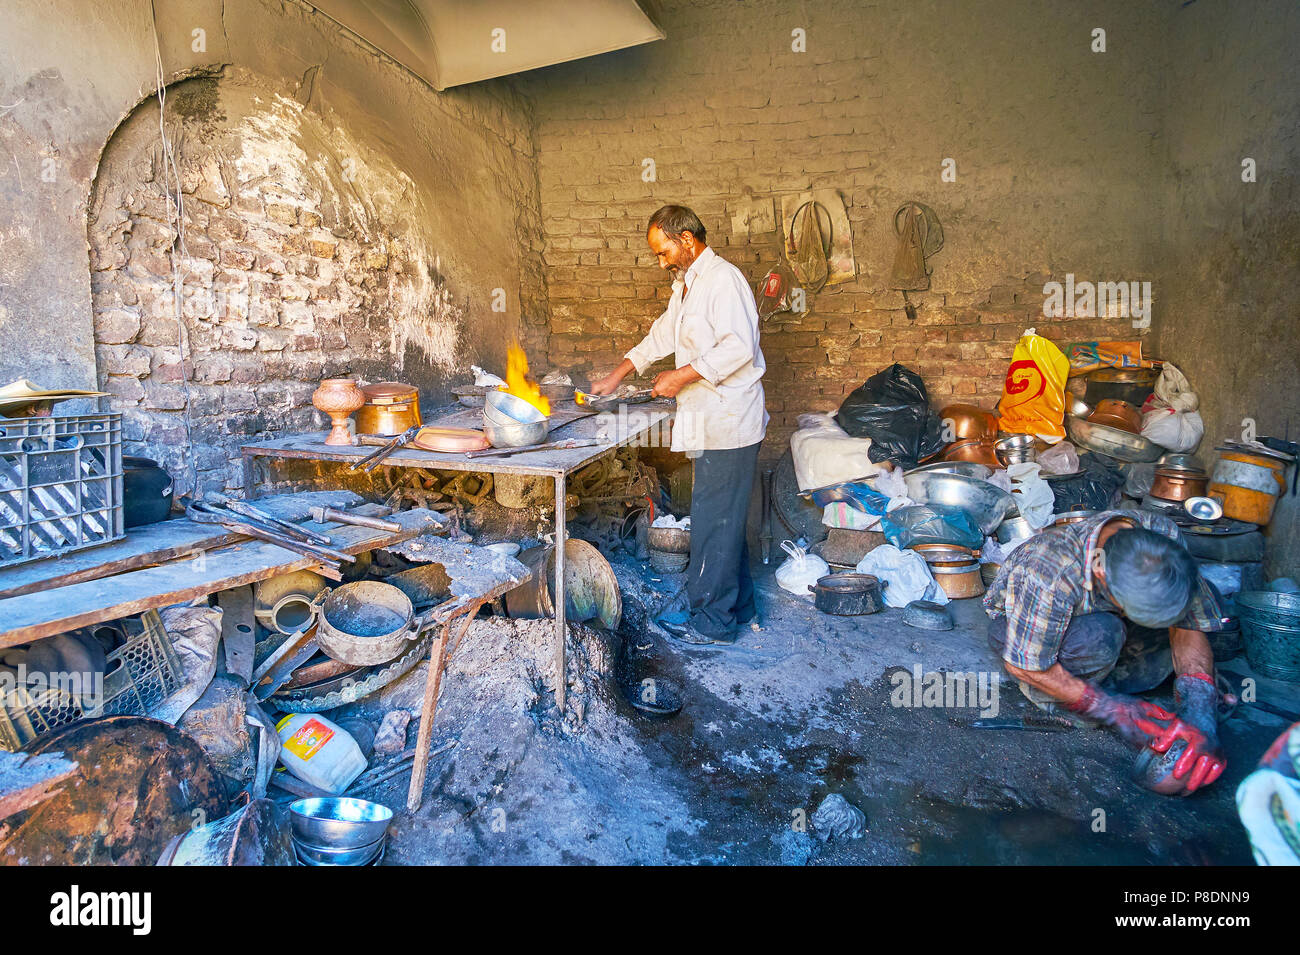 KERMAN, IRAN - OCTOBER 15, 2017: The workshop of cookware cleaners, that use fire, sand and small stones to clean, re-season and restore the old pans, Stock Photo